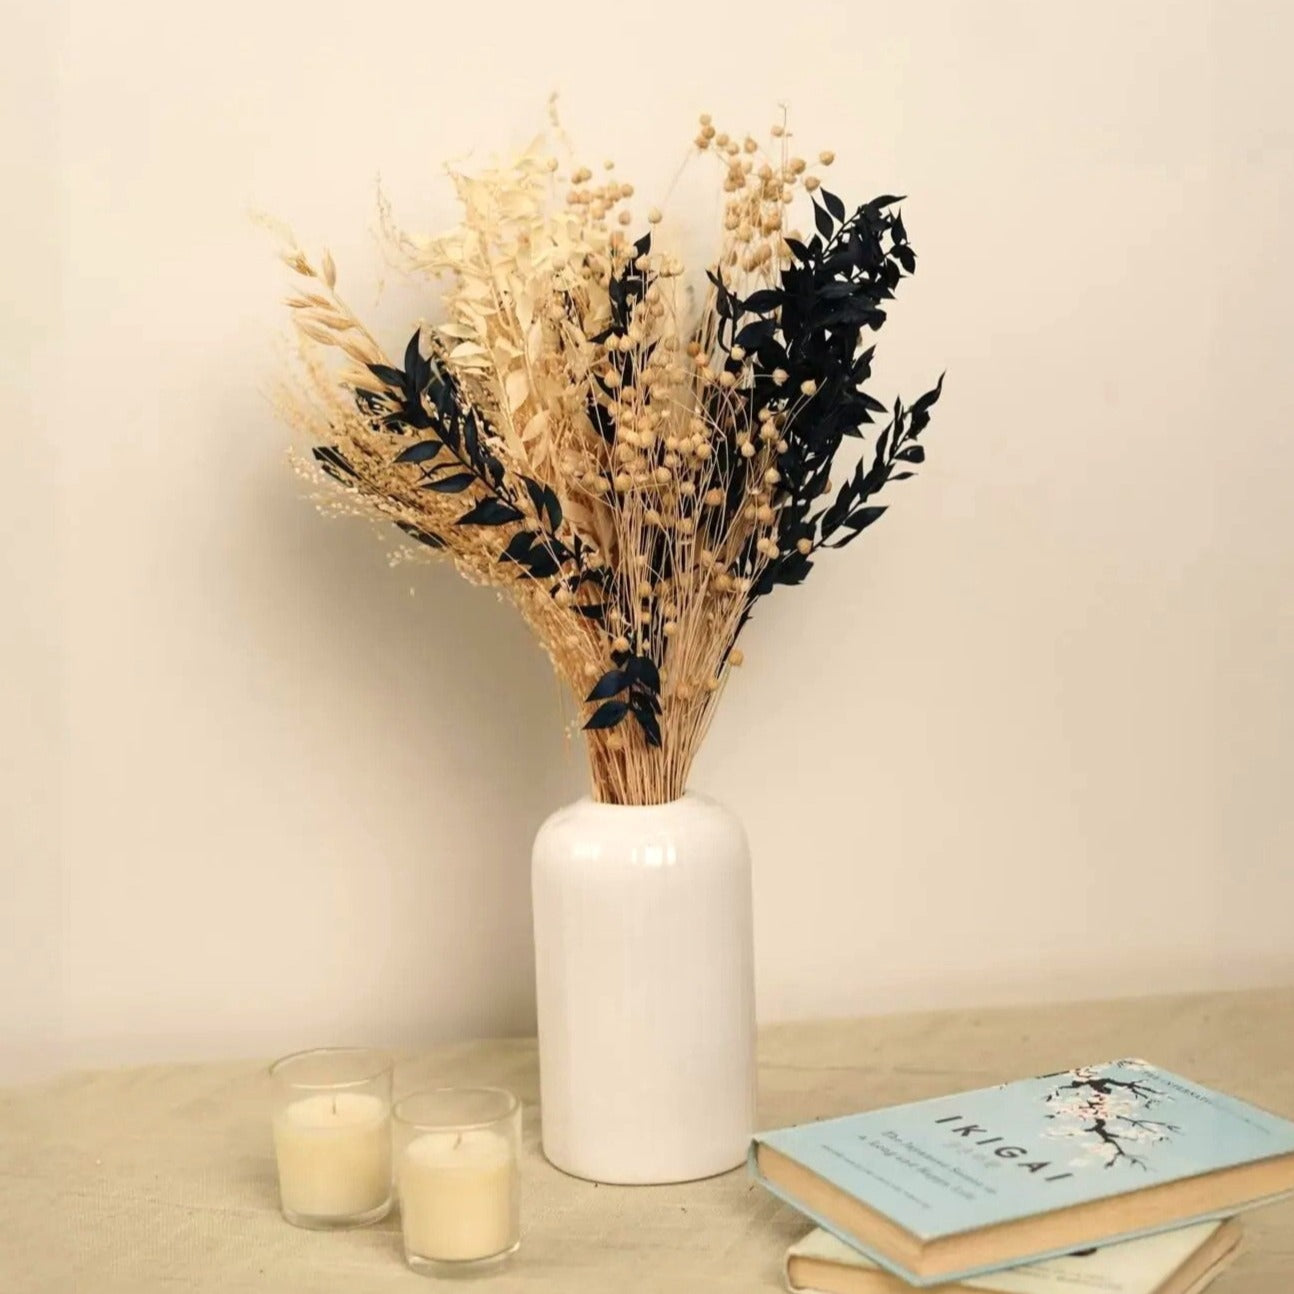 Midnight Blue Dried Flower Bunches | Dry Flowers to Decorate a Flower Vase | Dried Flower Arrangements for Living Space